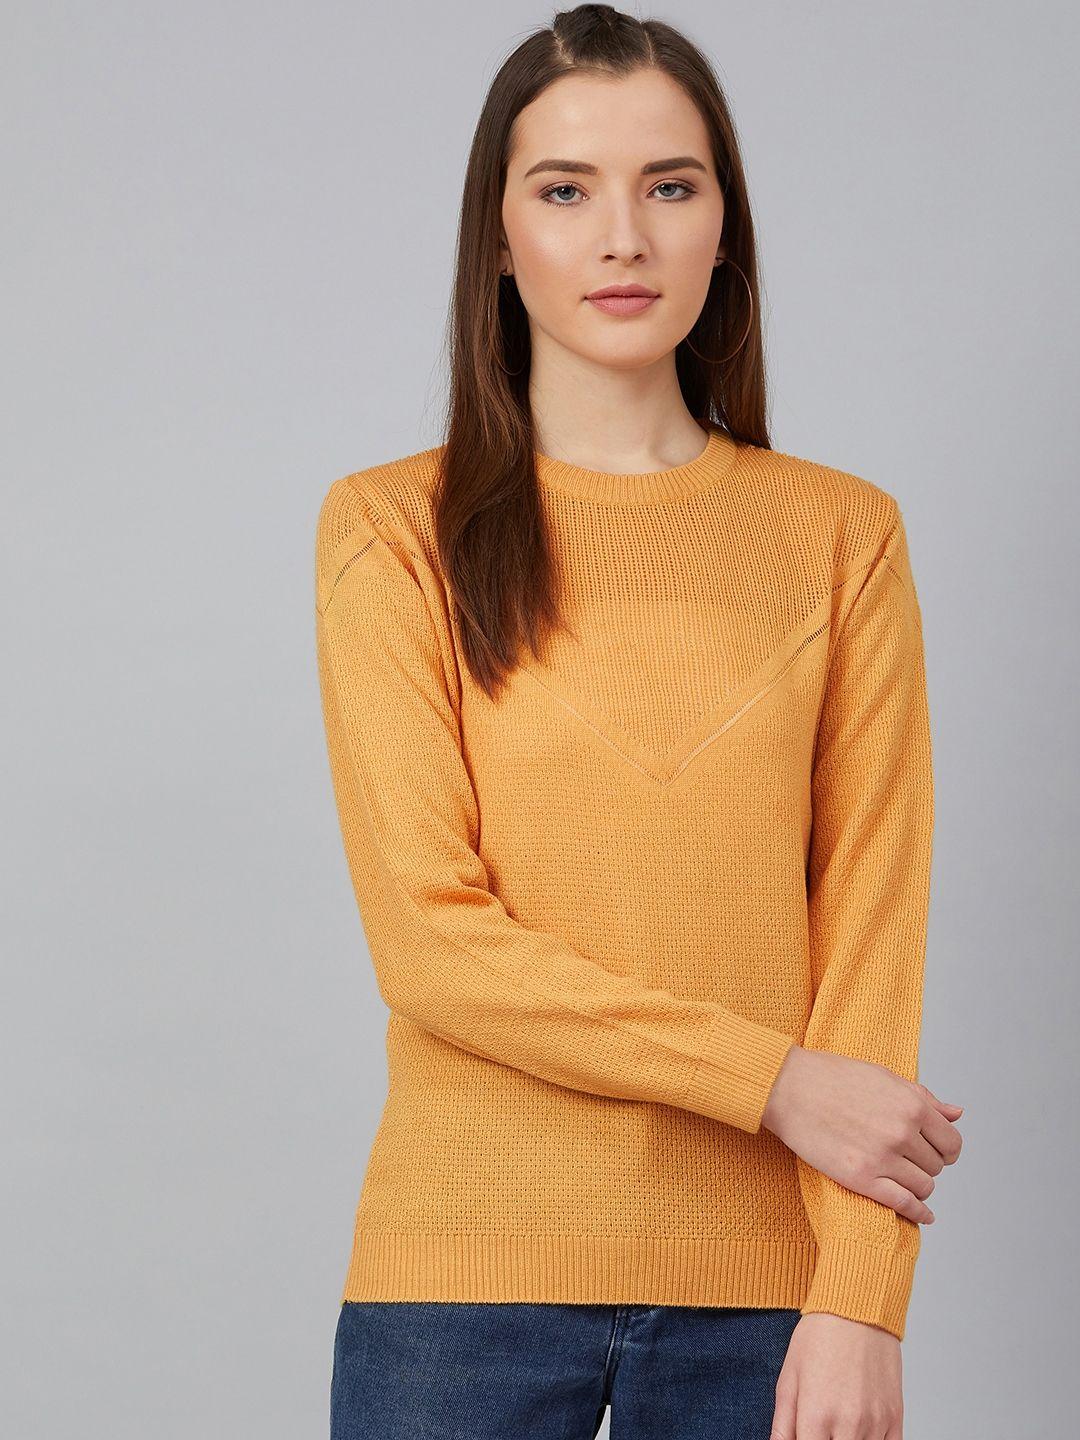 cayman-women-mustard-yellow-solid-acrylic-pullover-sweater